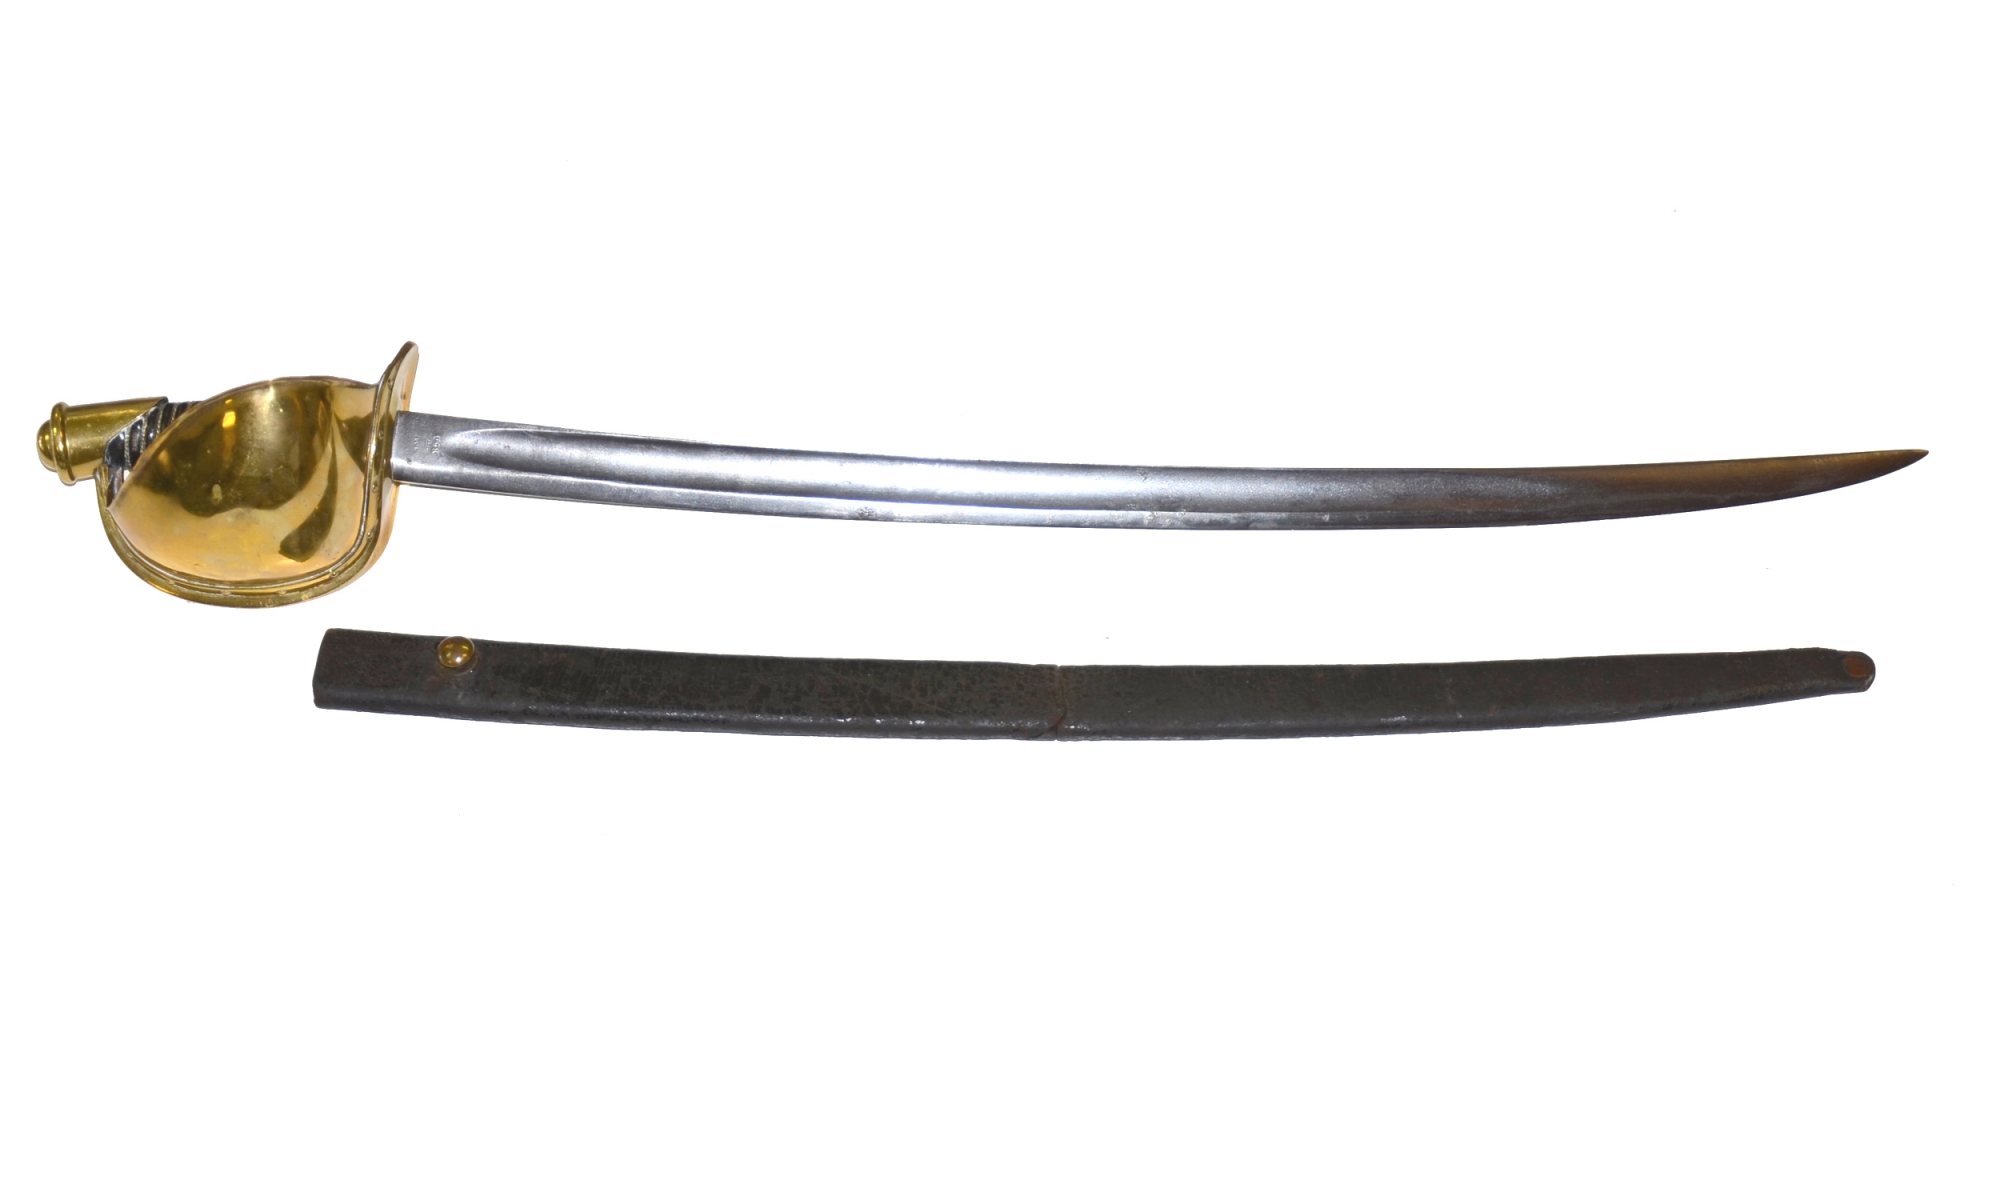 M1860 Ames naval cutlass dated 1862 with scabbard.